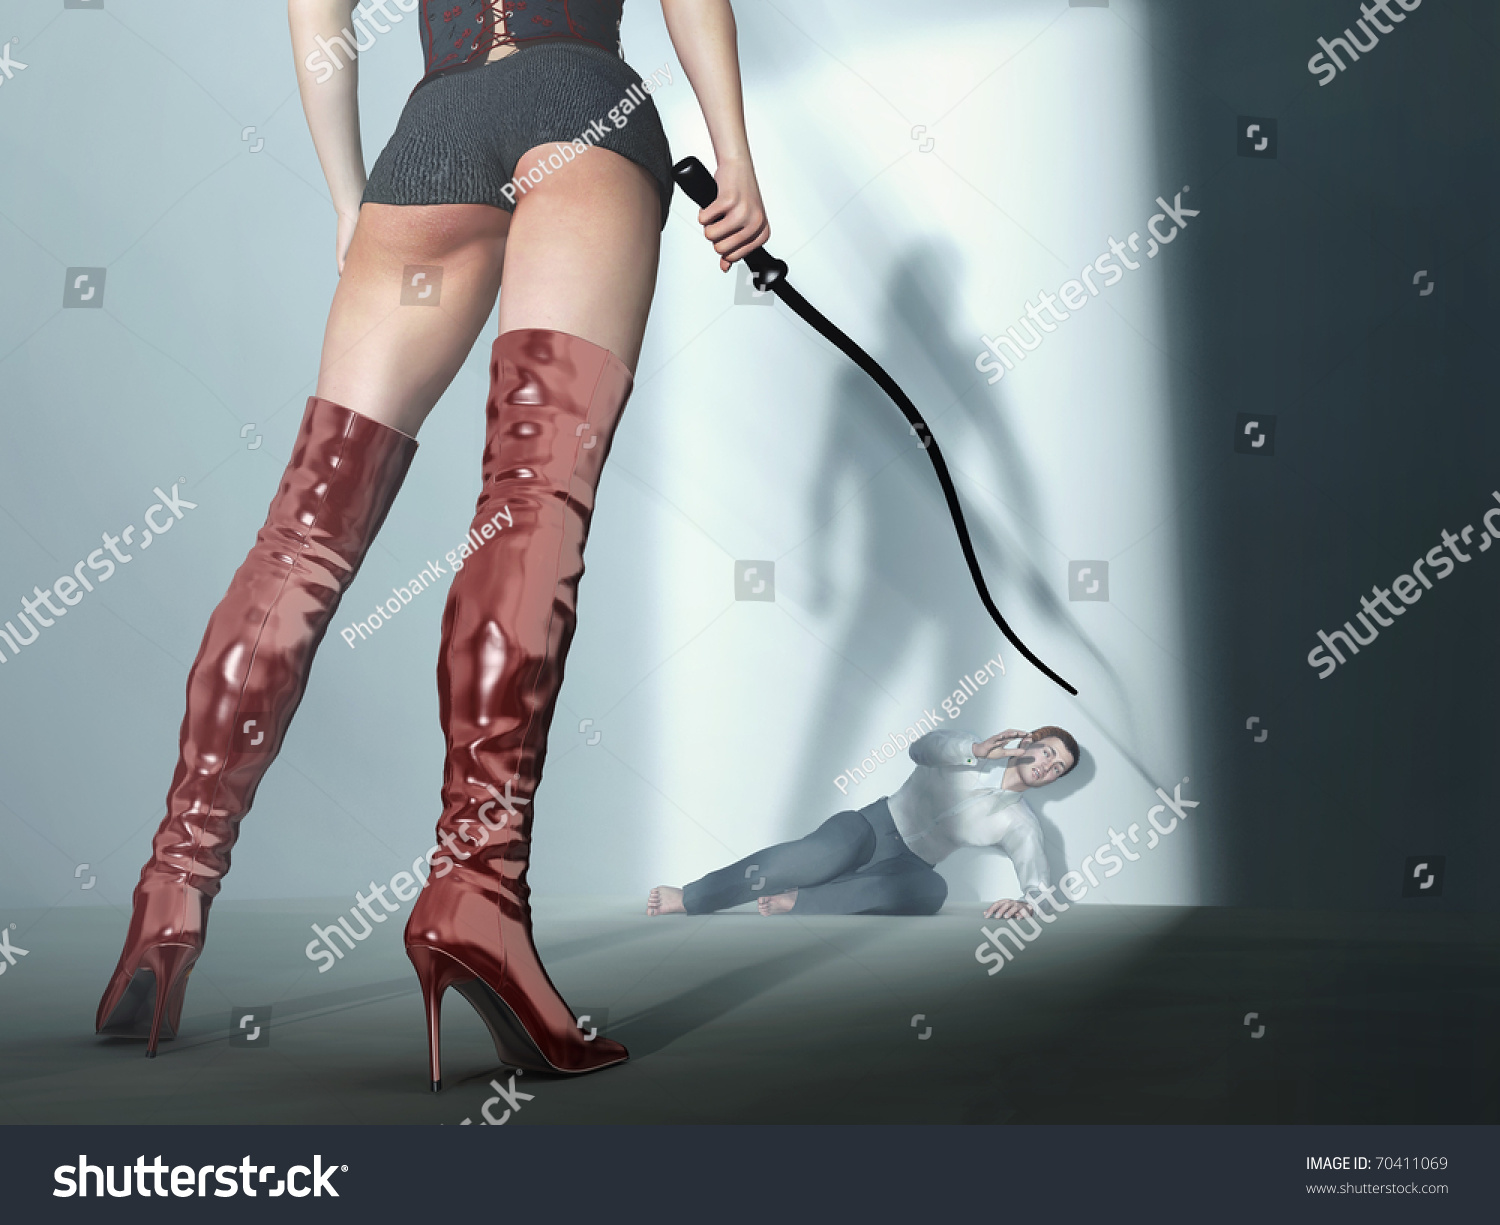 Femdom boots whip images